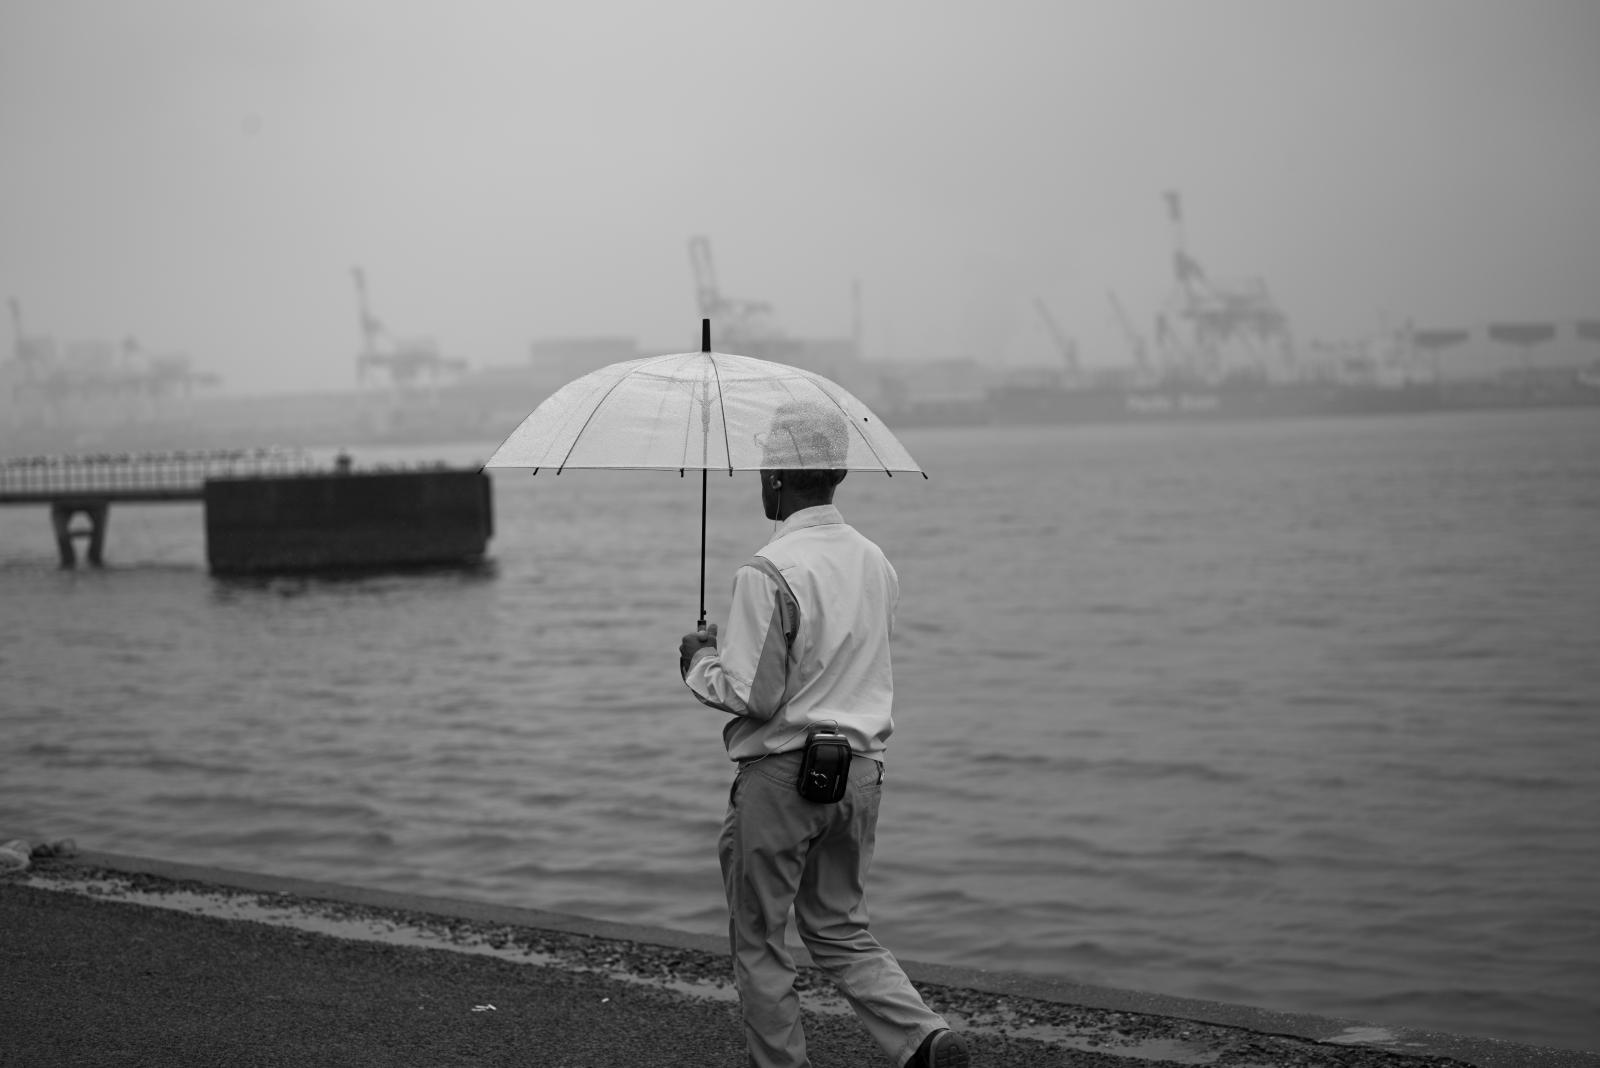 Nagoya Harbour - smoky, lonely....different. At least mysterious.